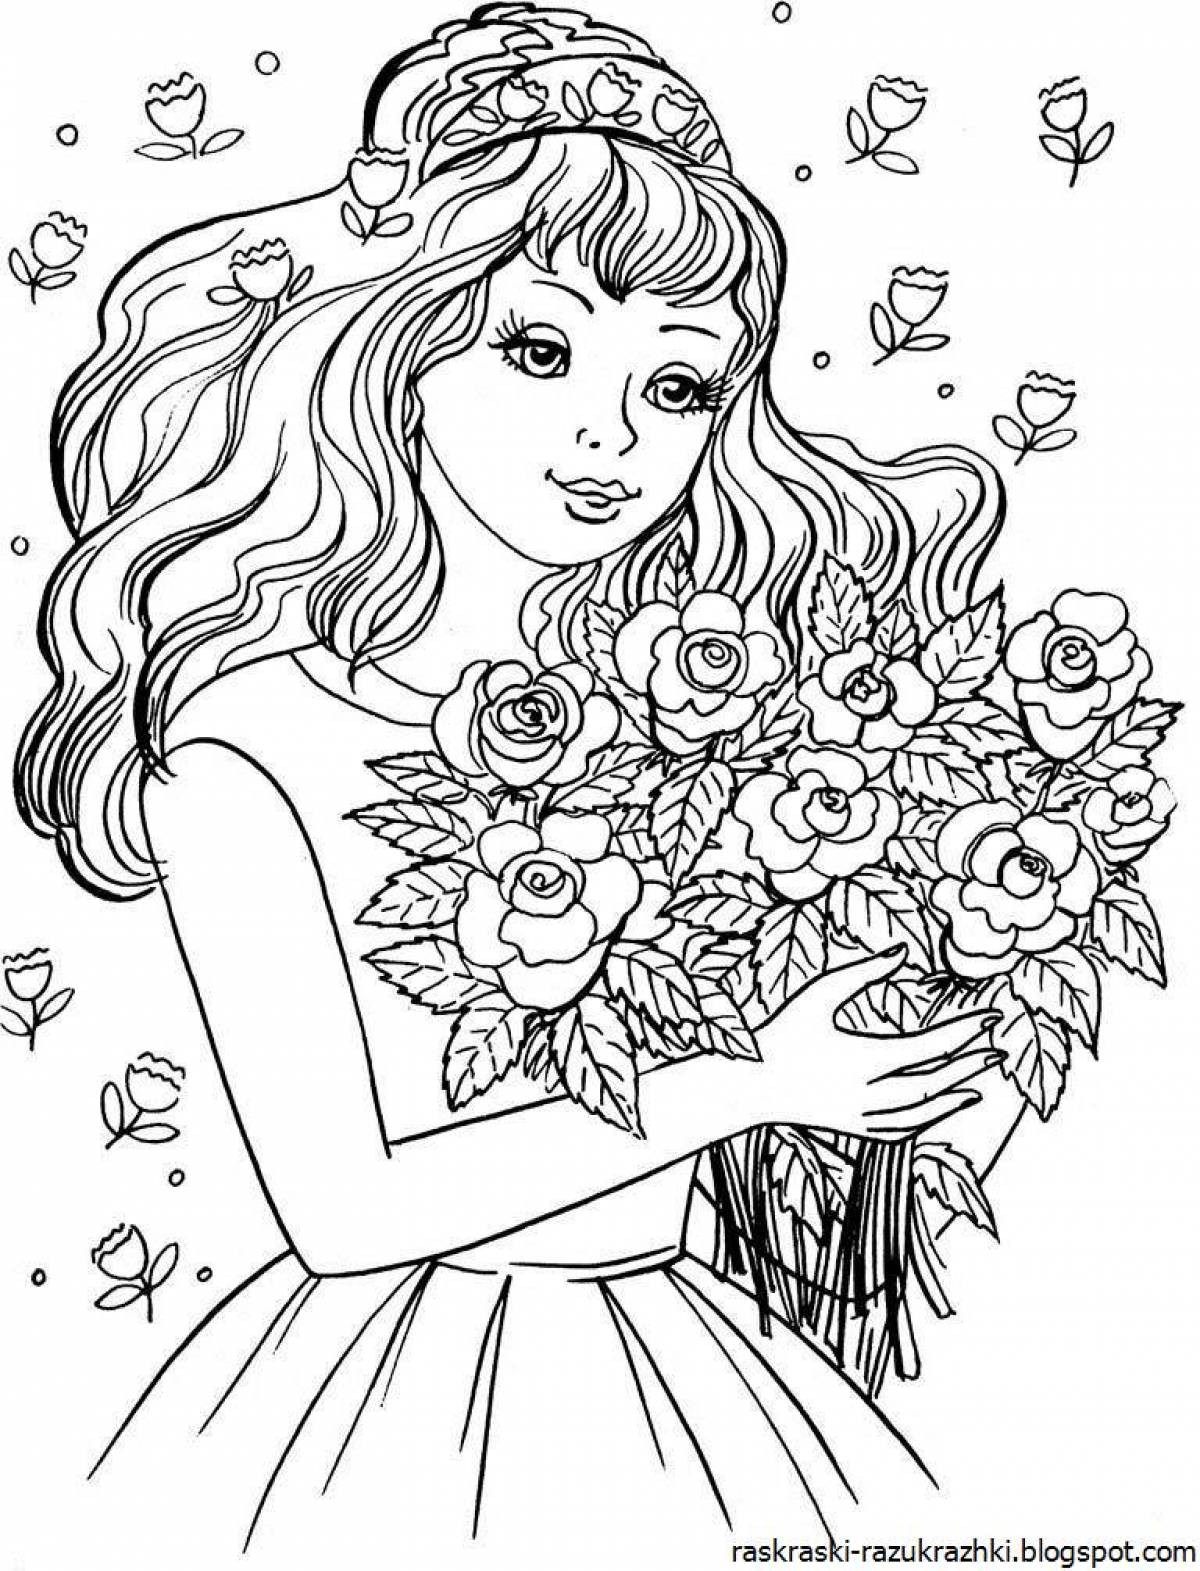 Elegant coloring book for girls 9 years old